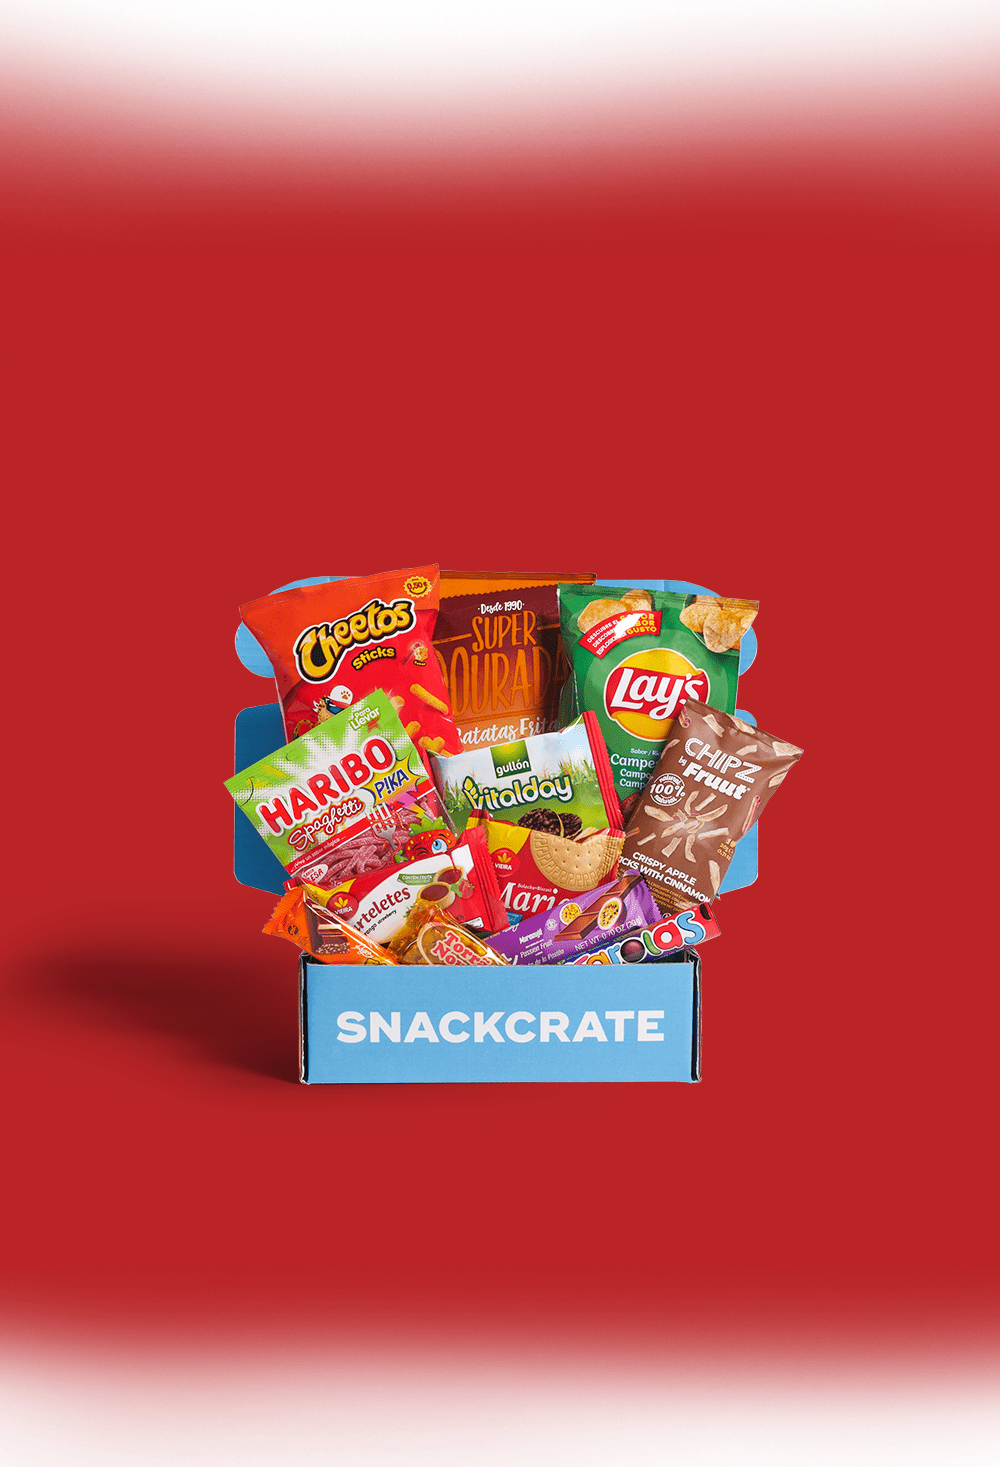 Portugal SnackCrate box